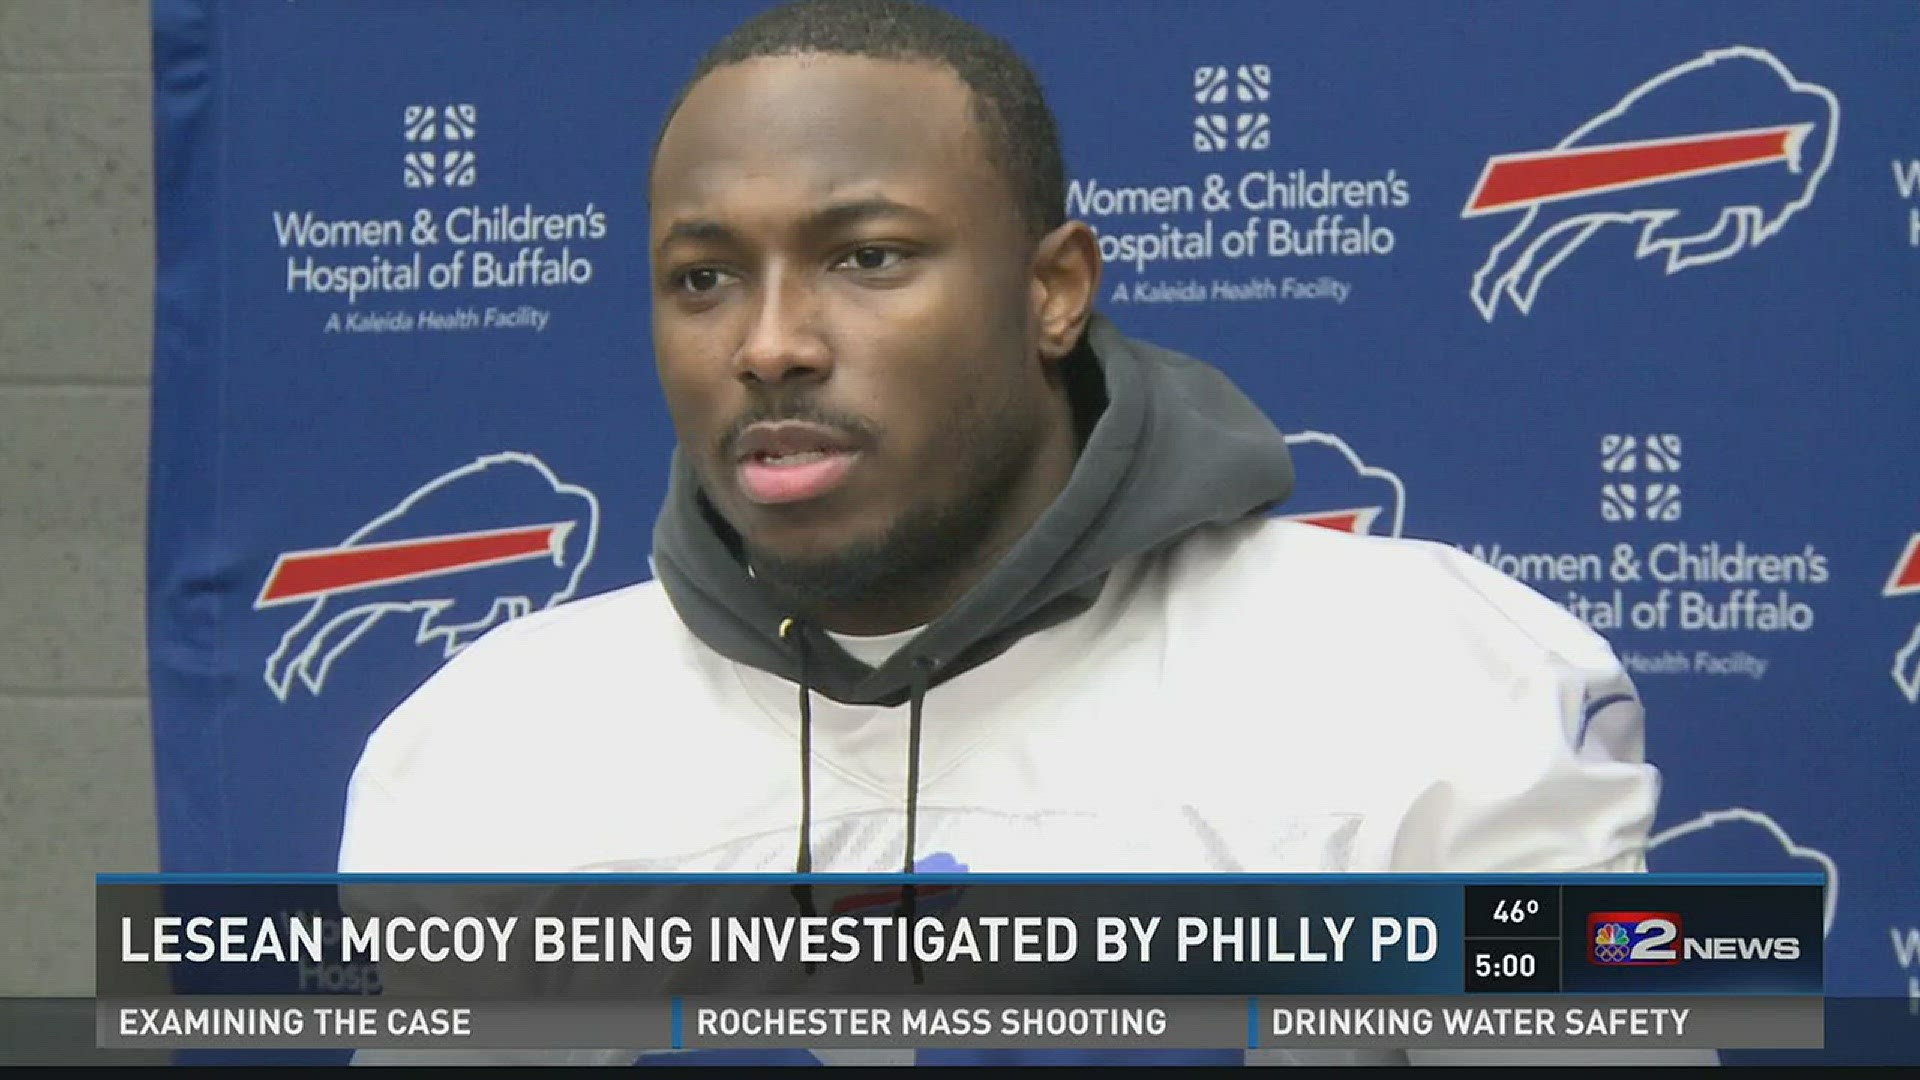 LeSean Mccoy Being Investigated By Philly PD